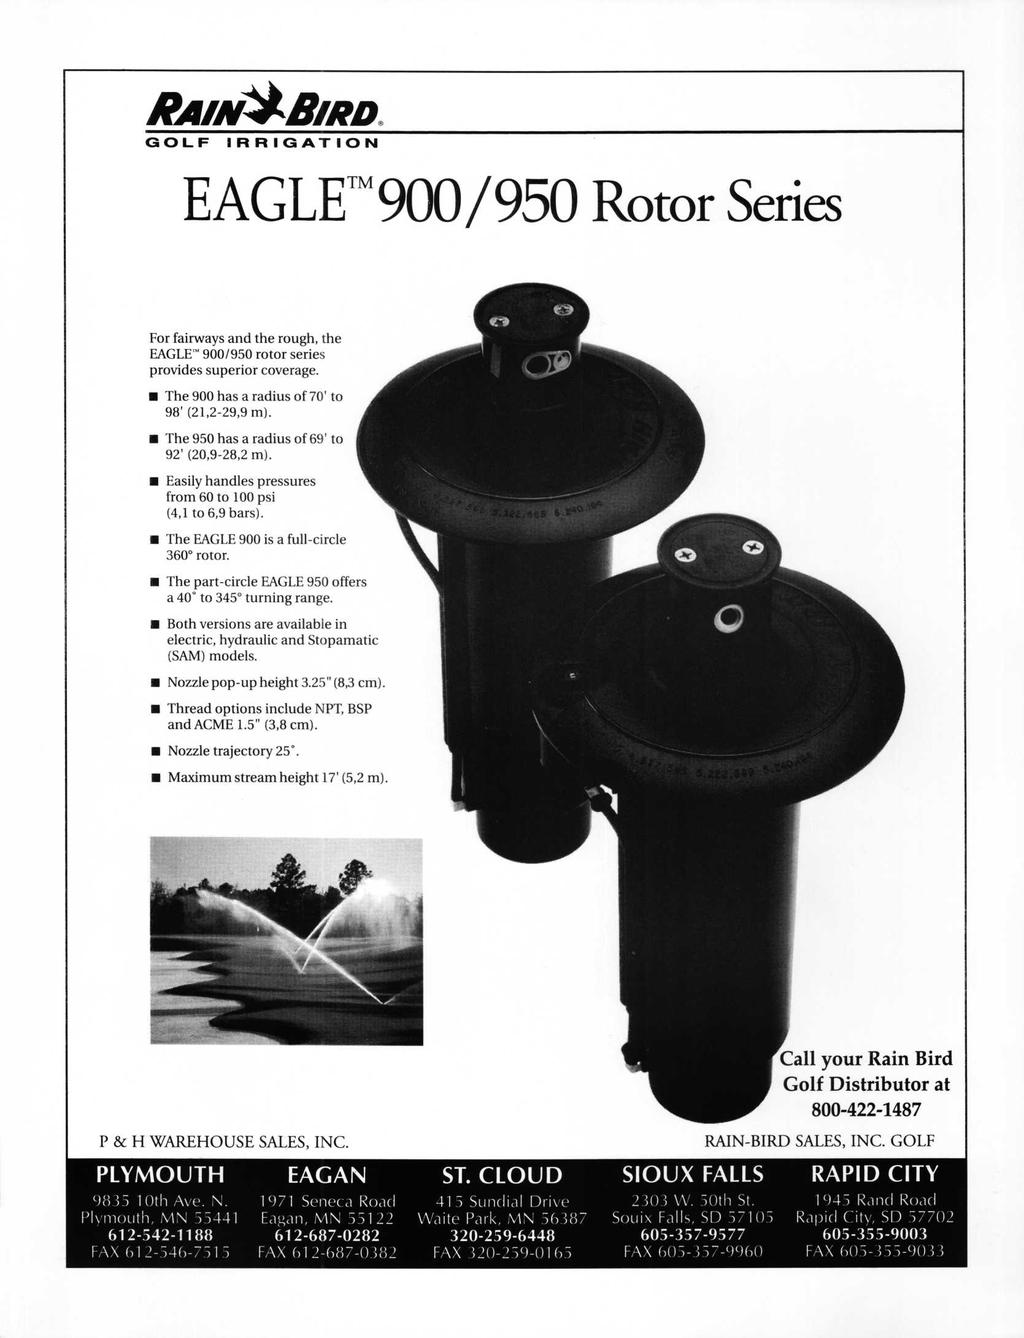 RAÈN^BÊRD GOLF IRRIGATION EAGLE 900/950 Rotor Series For fairways and the rough, the EAGLE 900/950 rotor series provides superior coverage. The 900 has a radius of 70' to 98' (21,2-29,9 m).